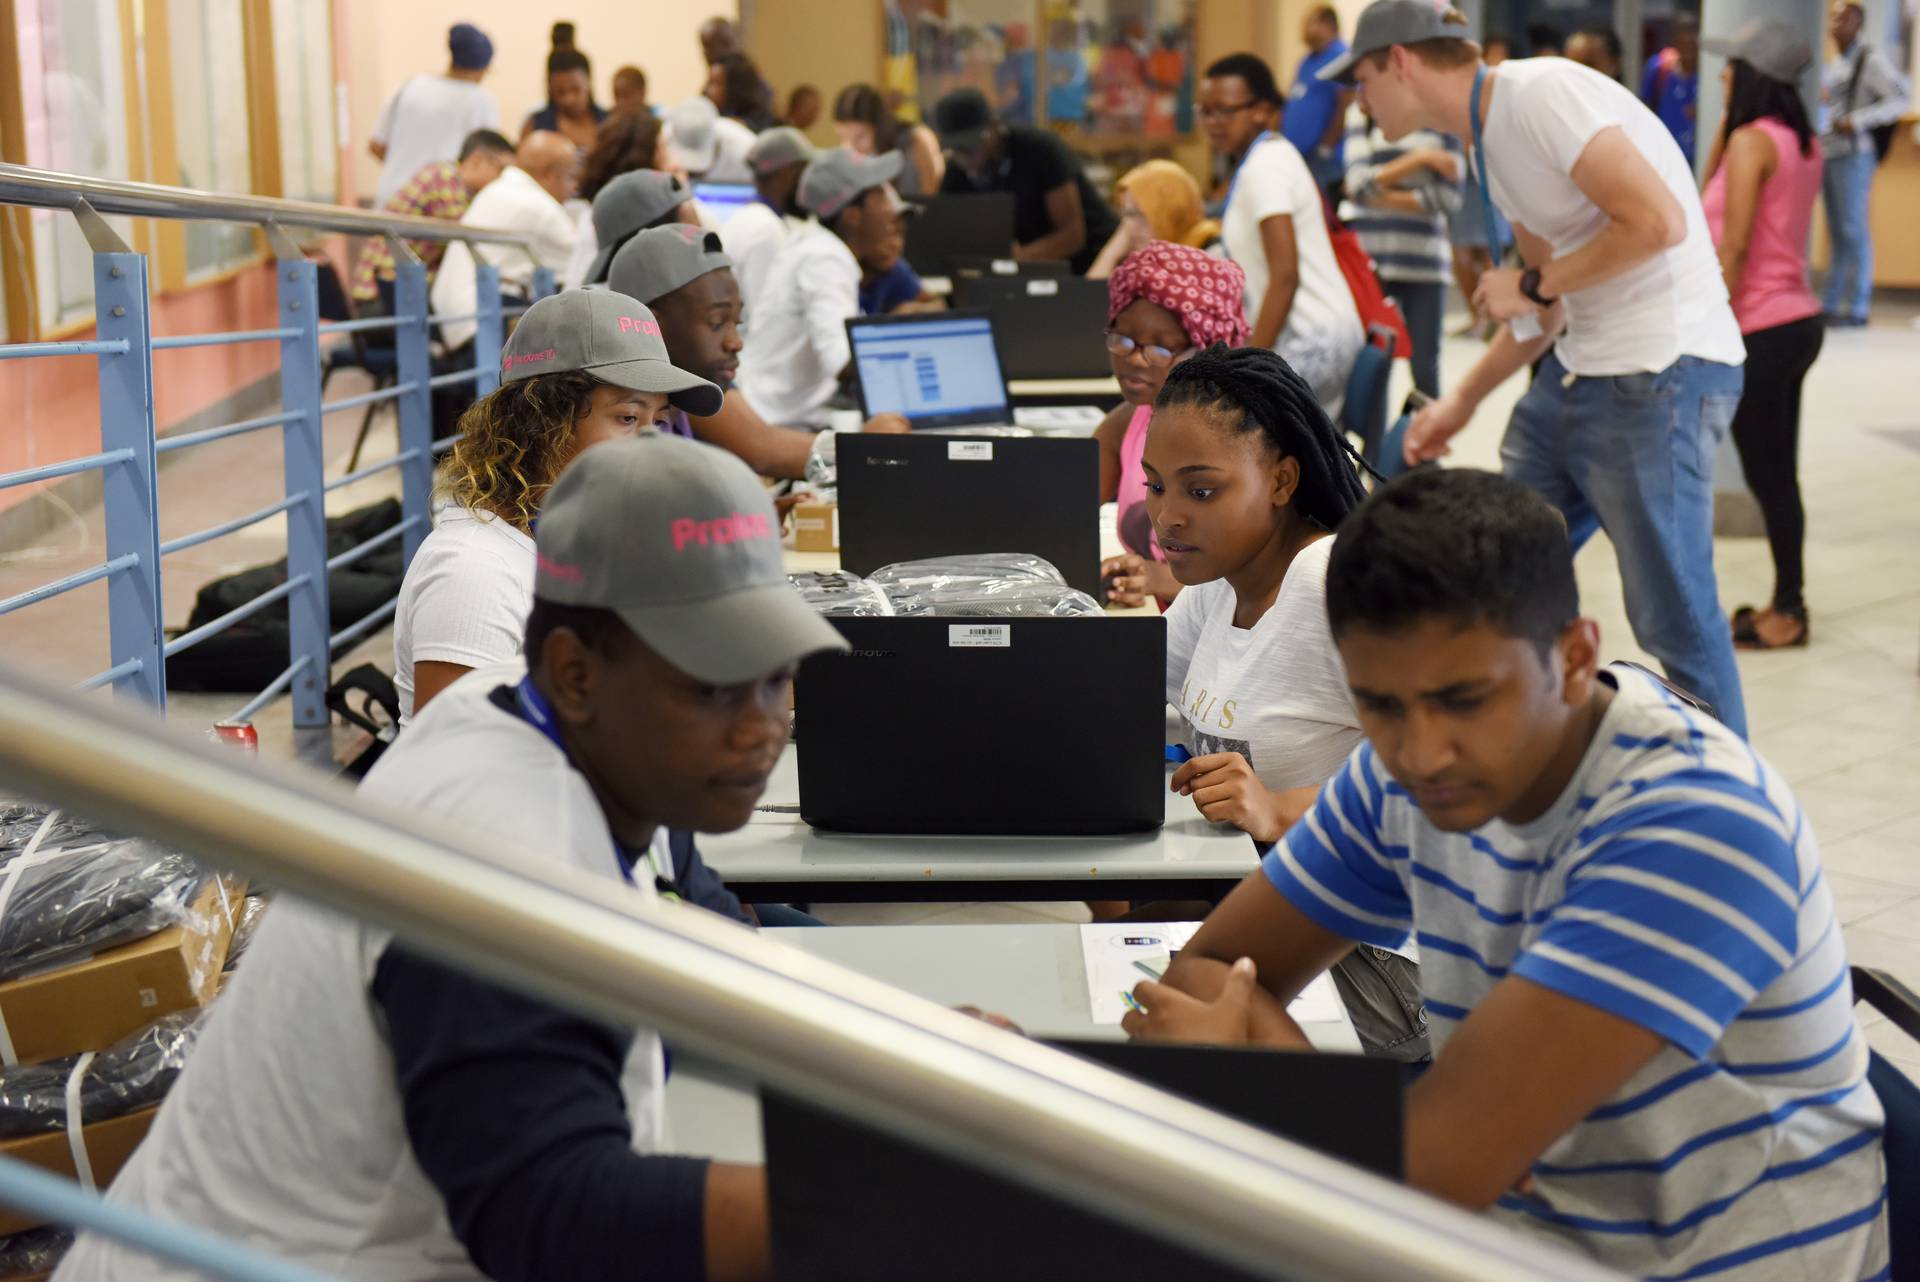 First-year NSFAS students receiving laptops sponsored by UCT at the PD Hahn building on upper campus.